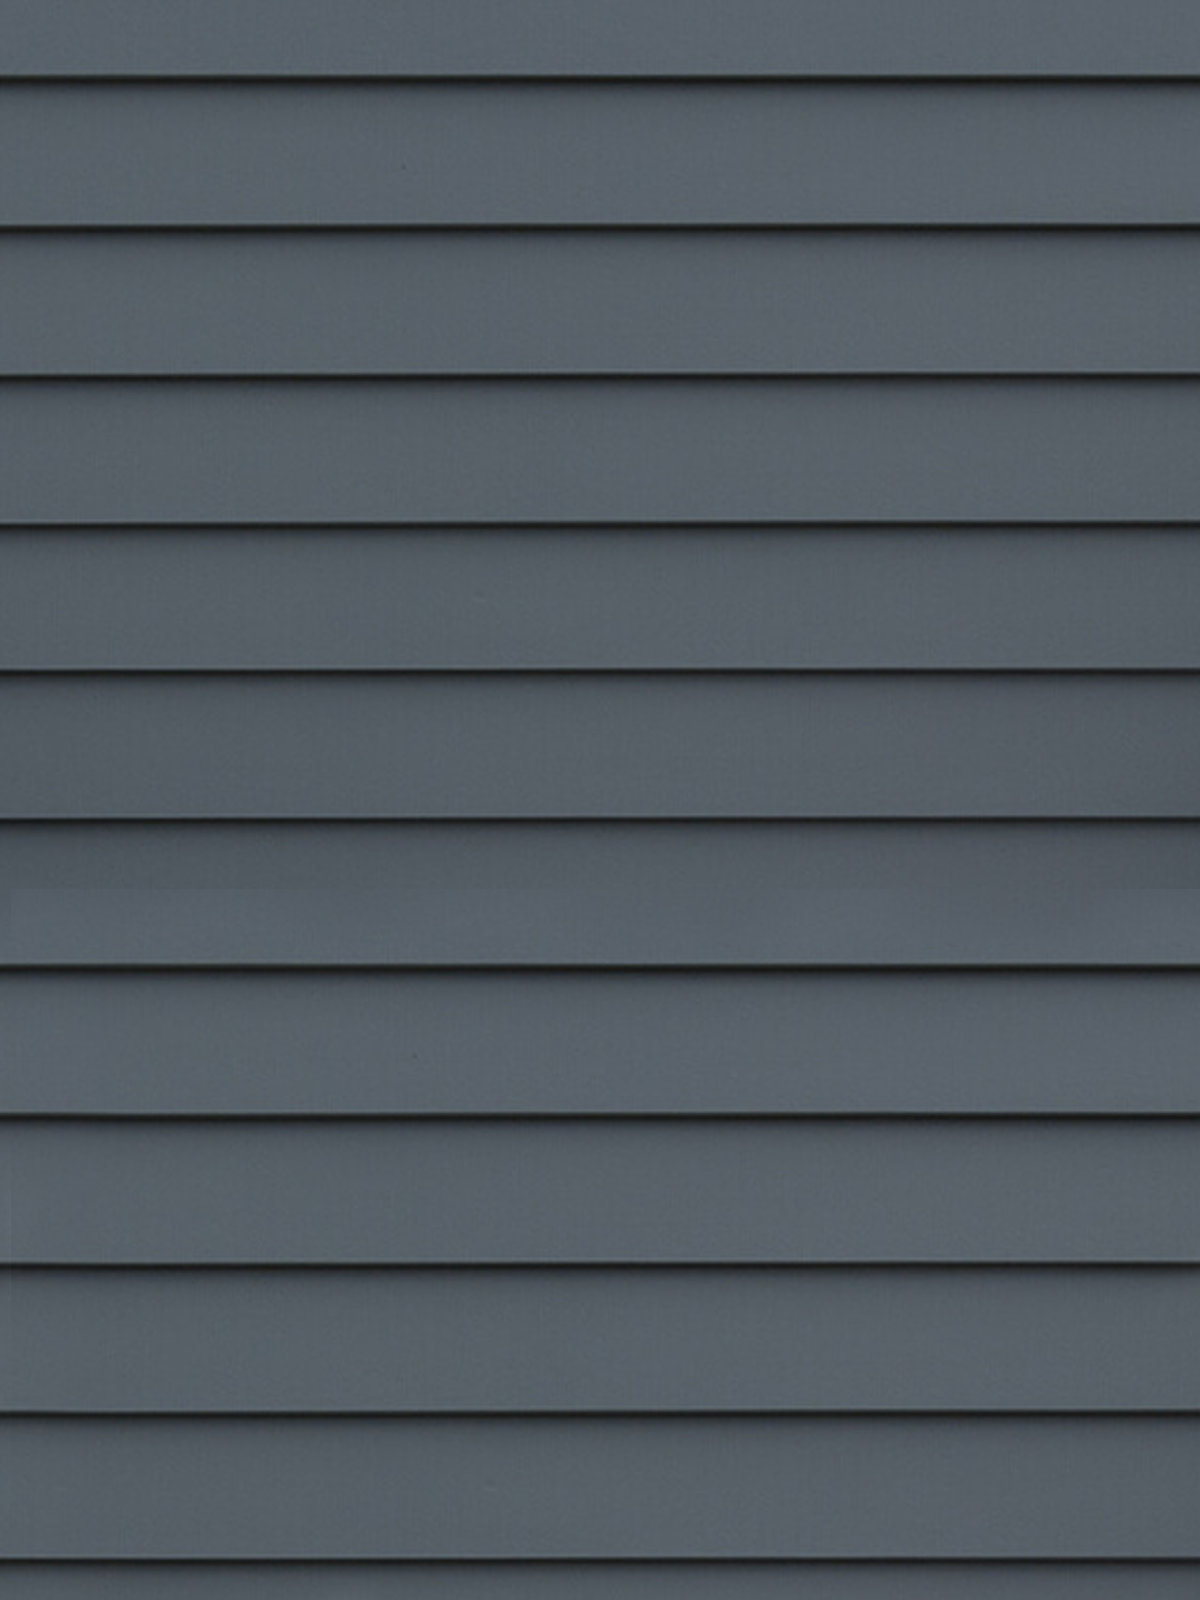 HardiePlank™ Weatherboard Smooth 4200 X 230mm 400265 –, 51% OFF